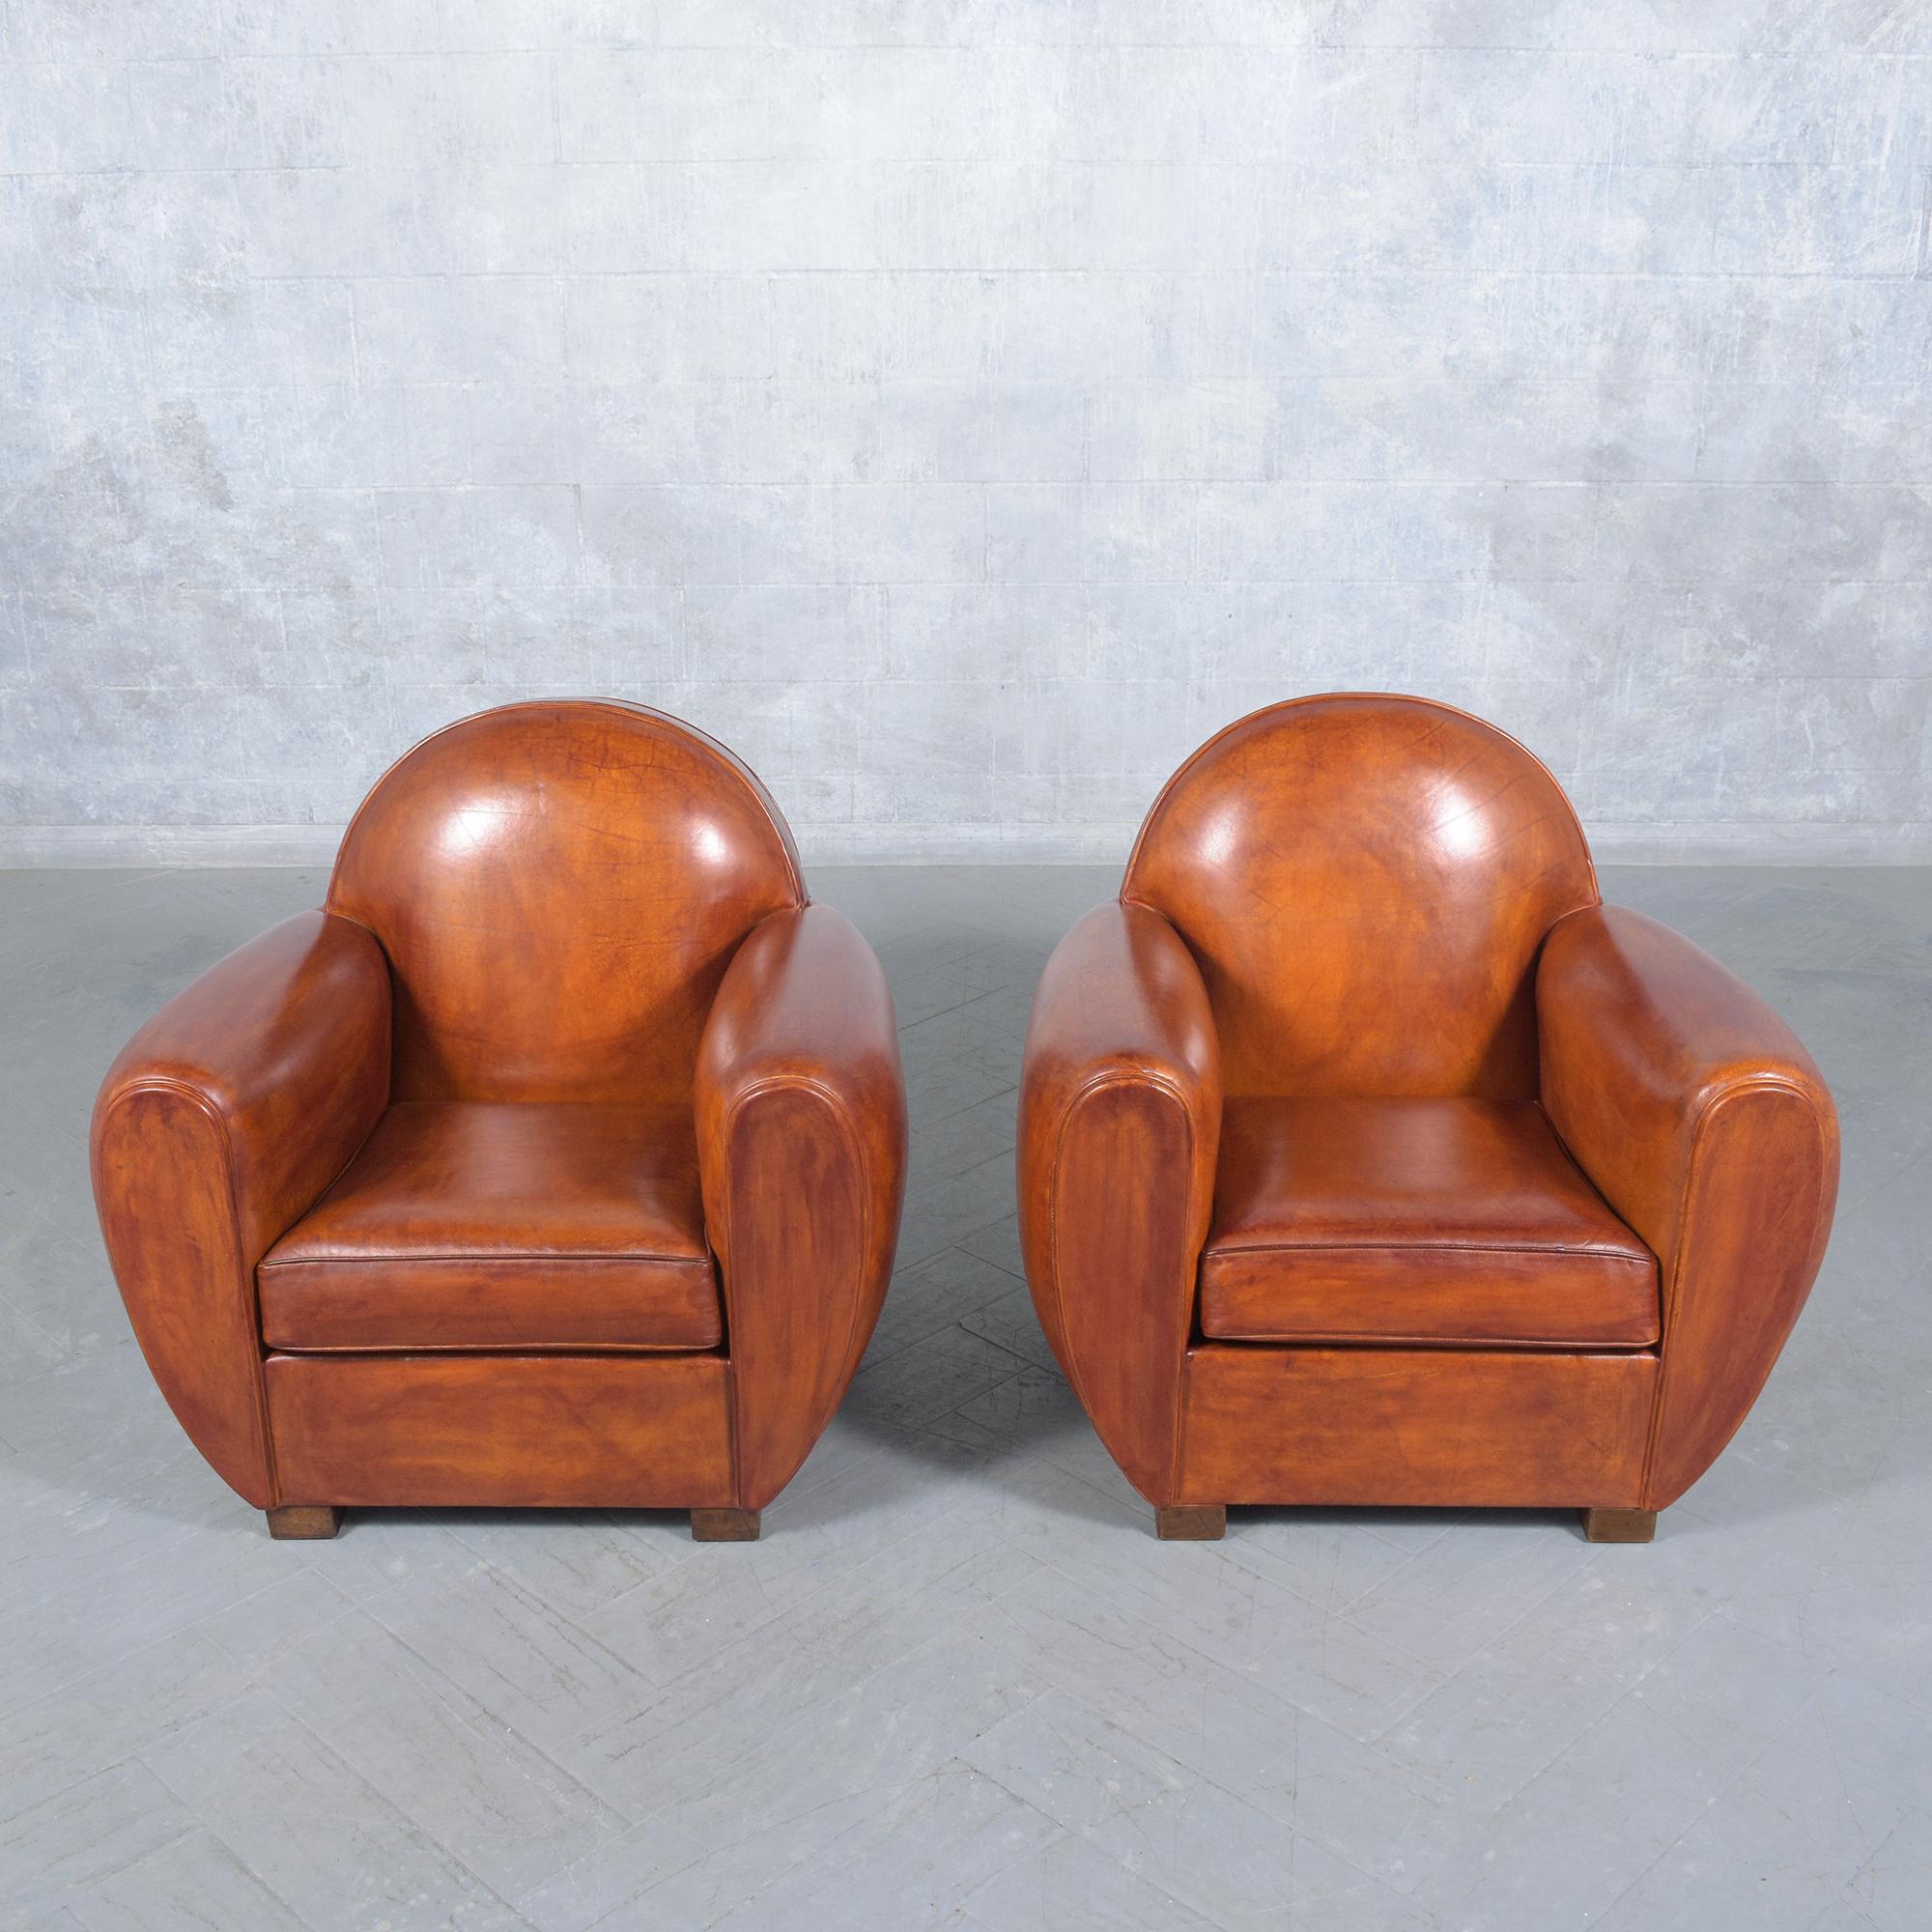 Restored Art Deco Club Chairs: 1960s French Deco Elegance For Sale 1